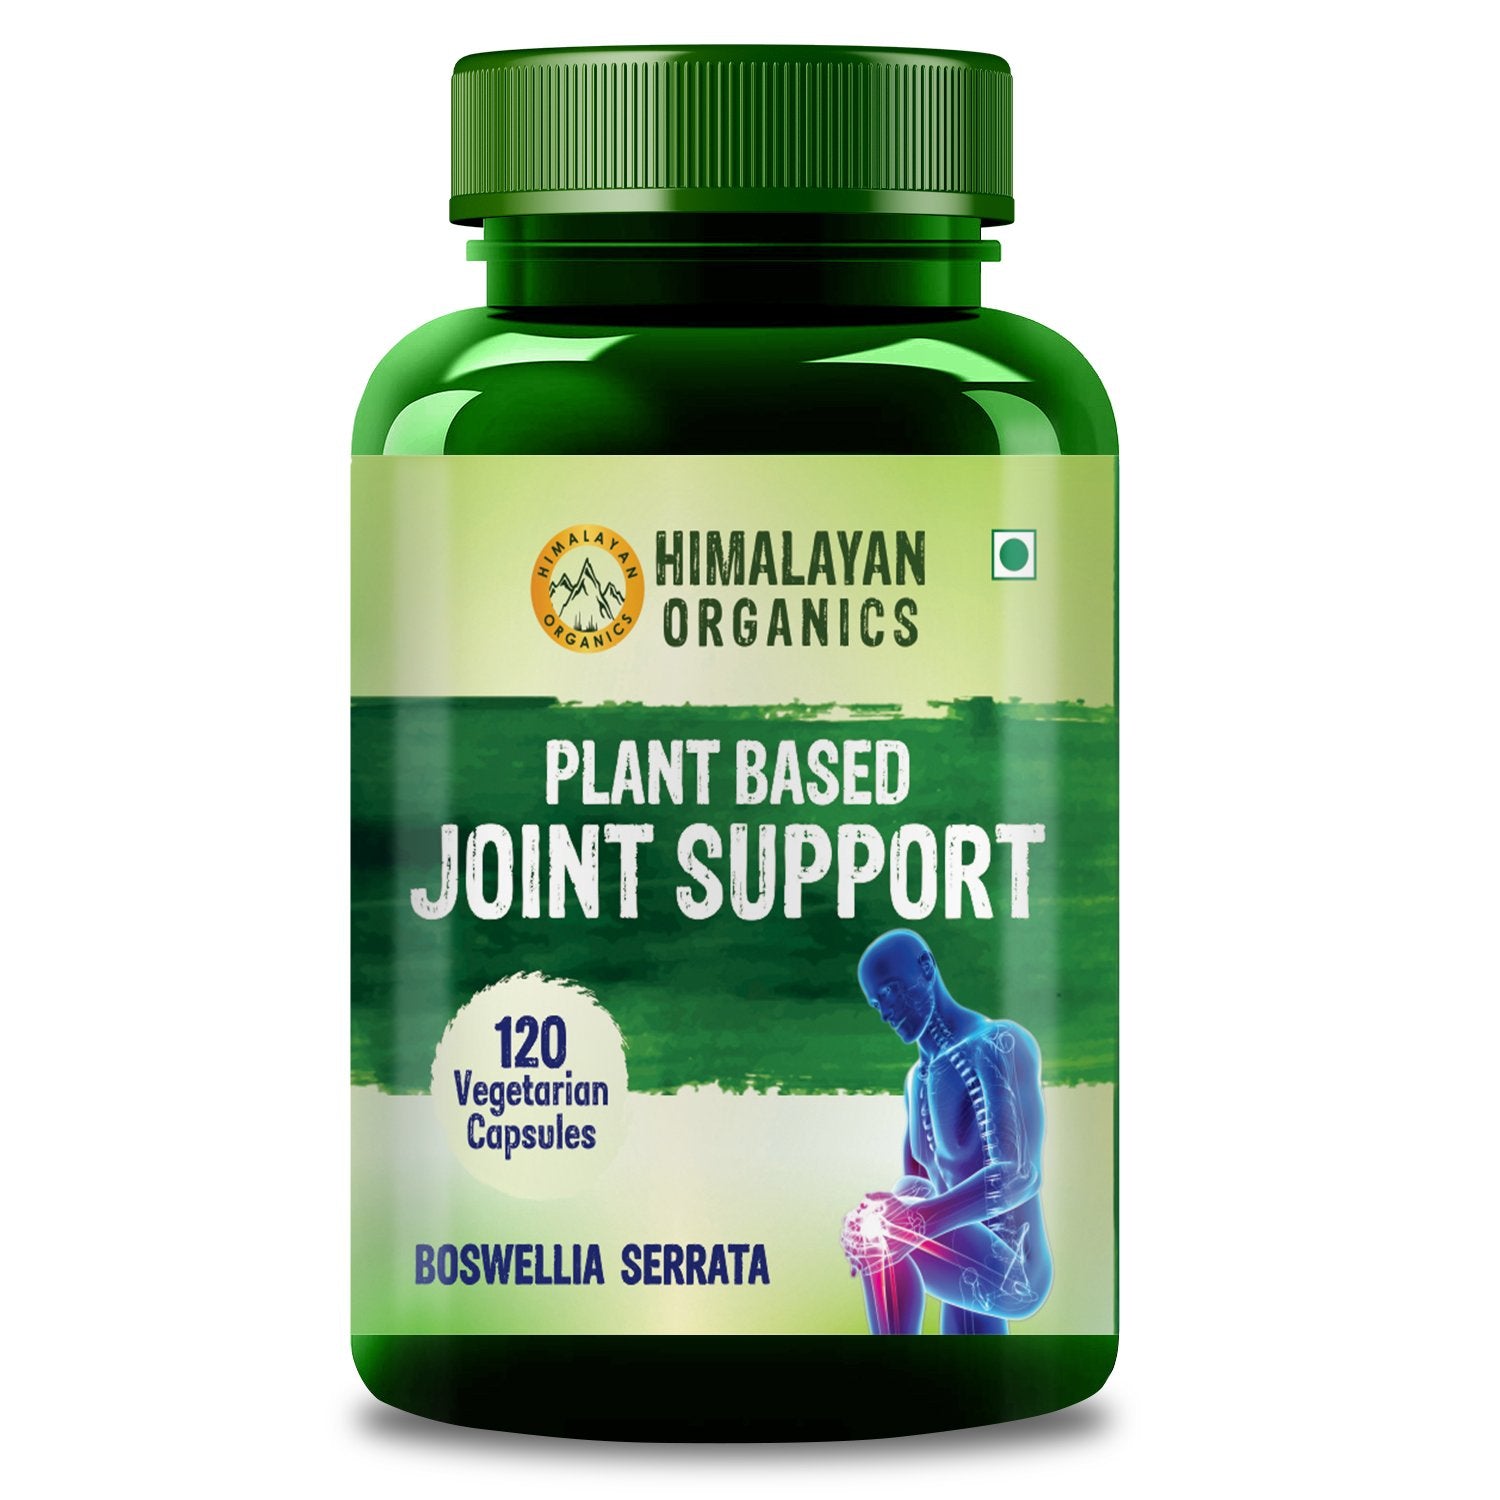 Himalayan Organics Plant Based Joint Support | 120 Capsules